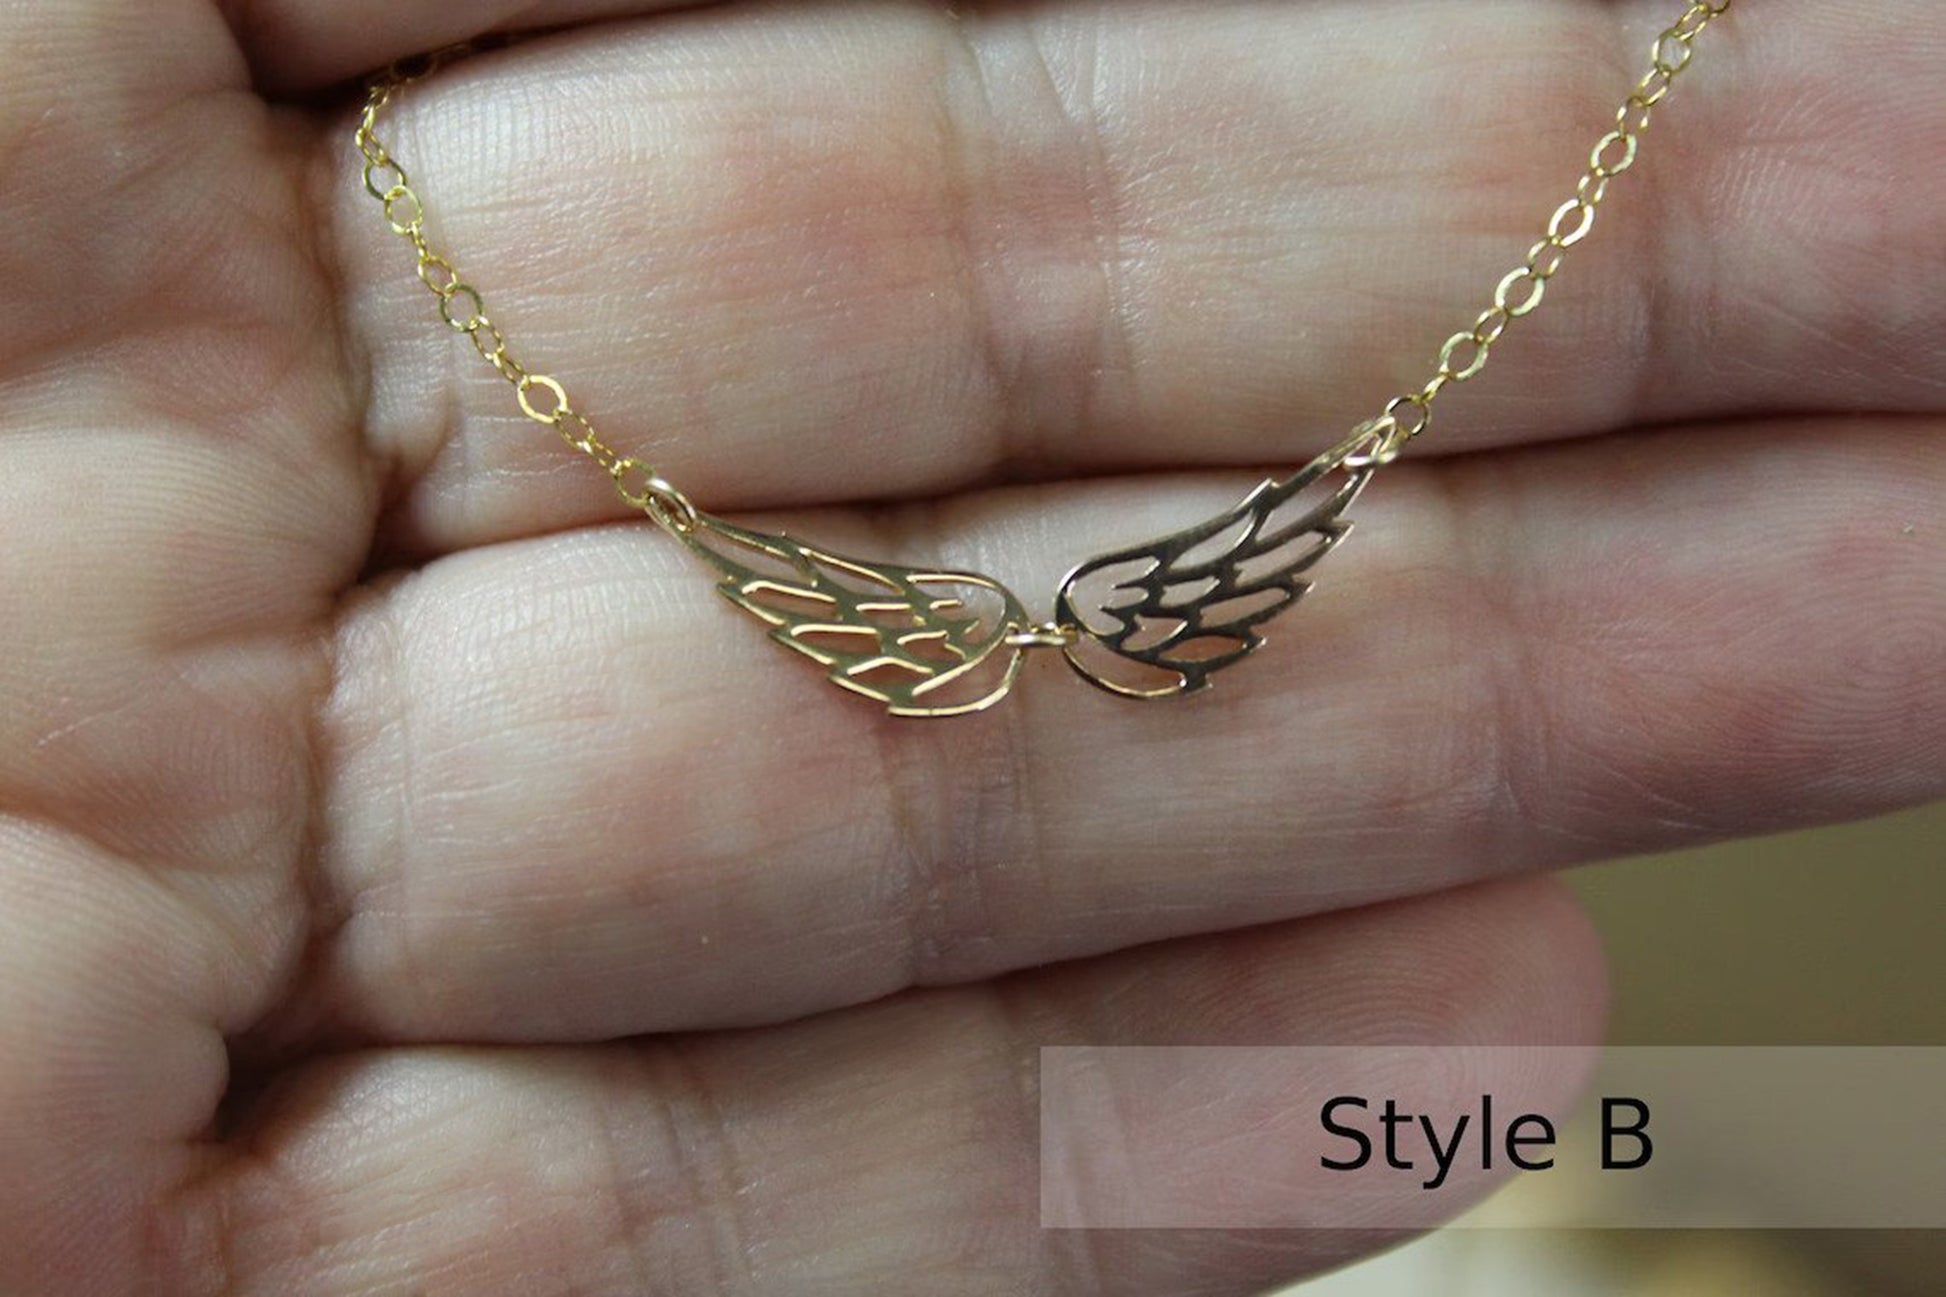 Gold Filled memorial necklace with double angel wing charm is held in a woman's hand.